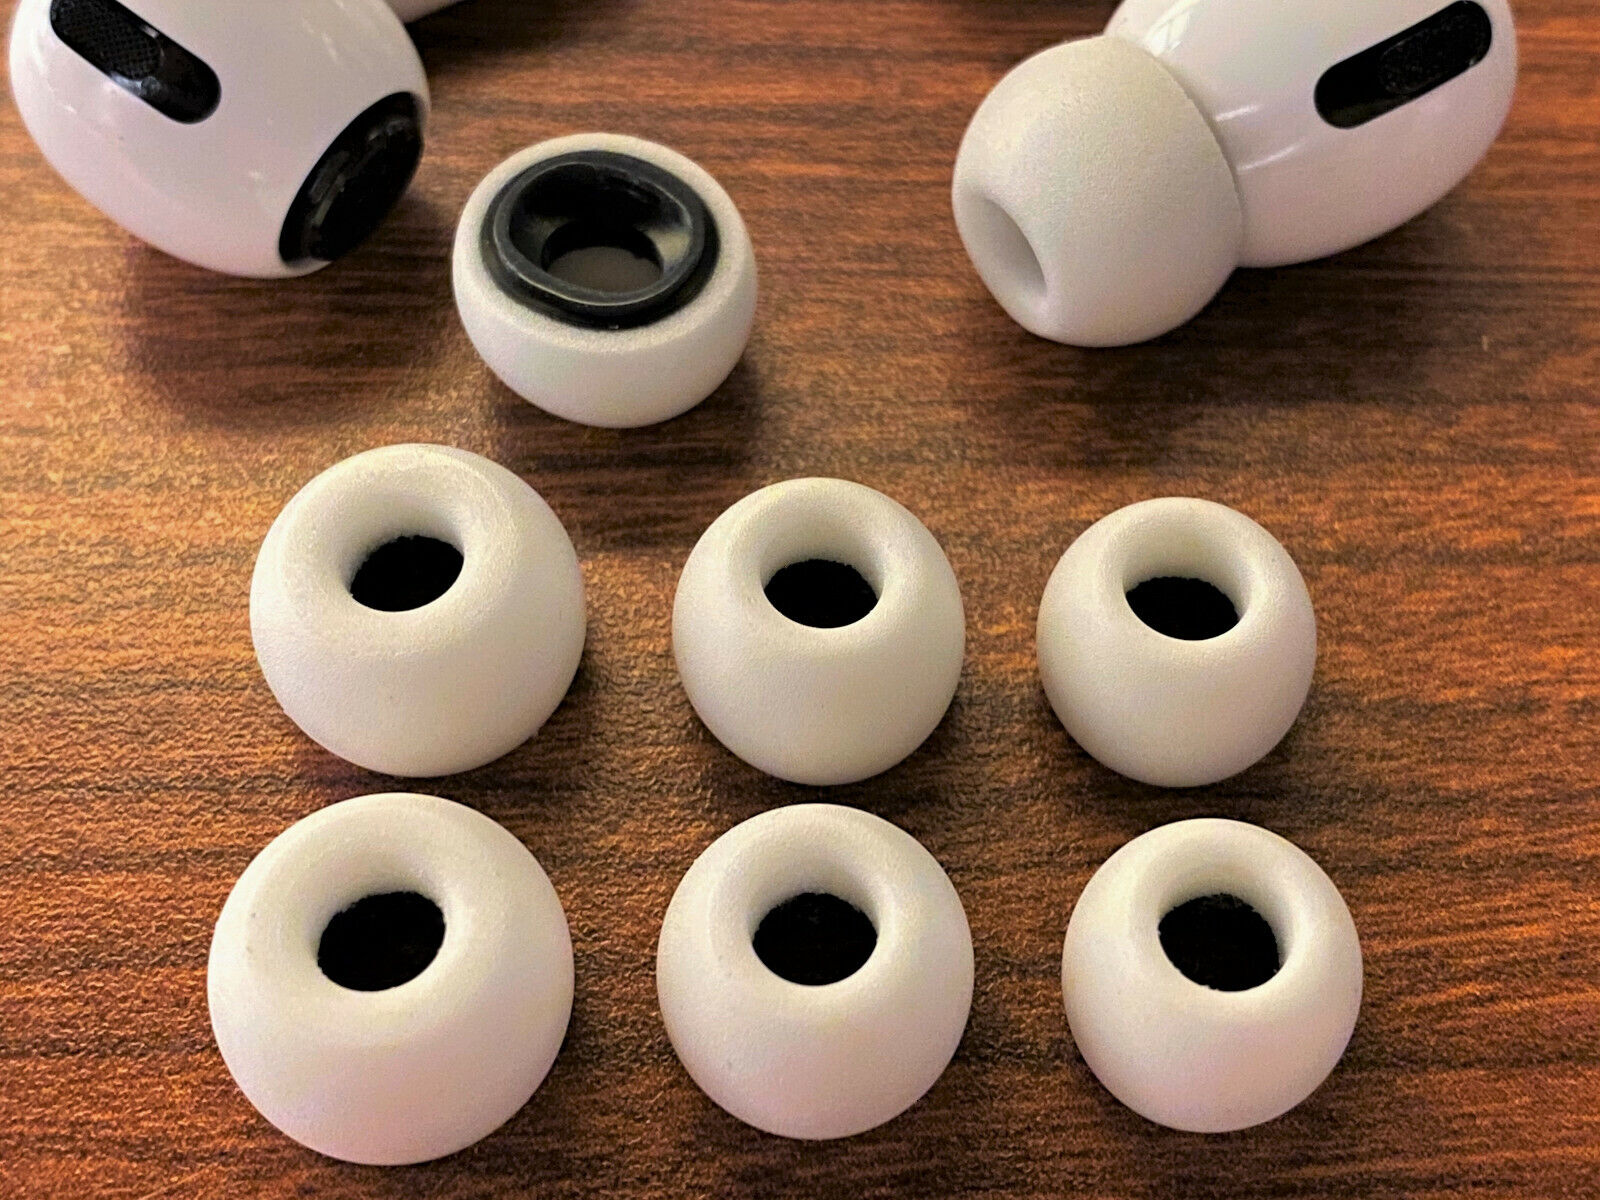 THE ORIGINAL 9PC Memory Foam Ear Tips For Apple Airpods Pro 1 or 2 White S/M/L